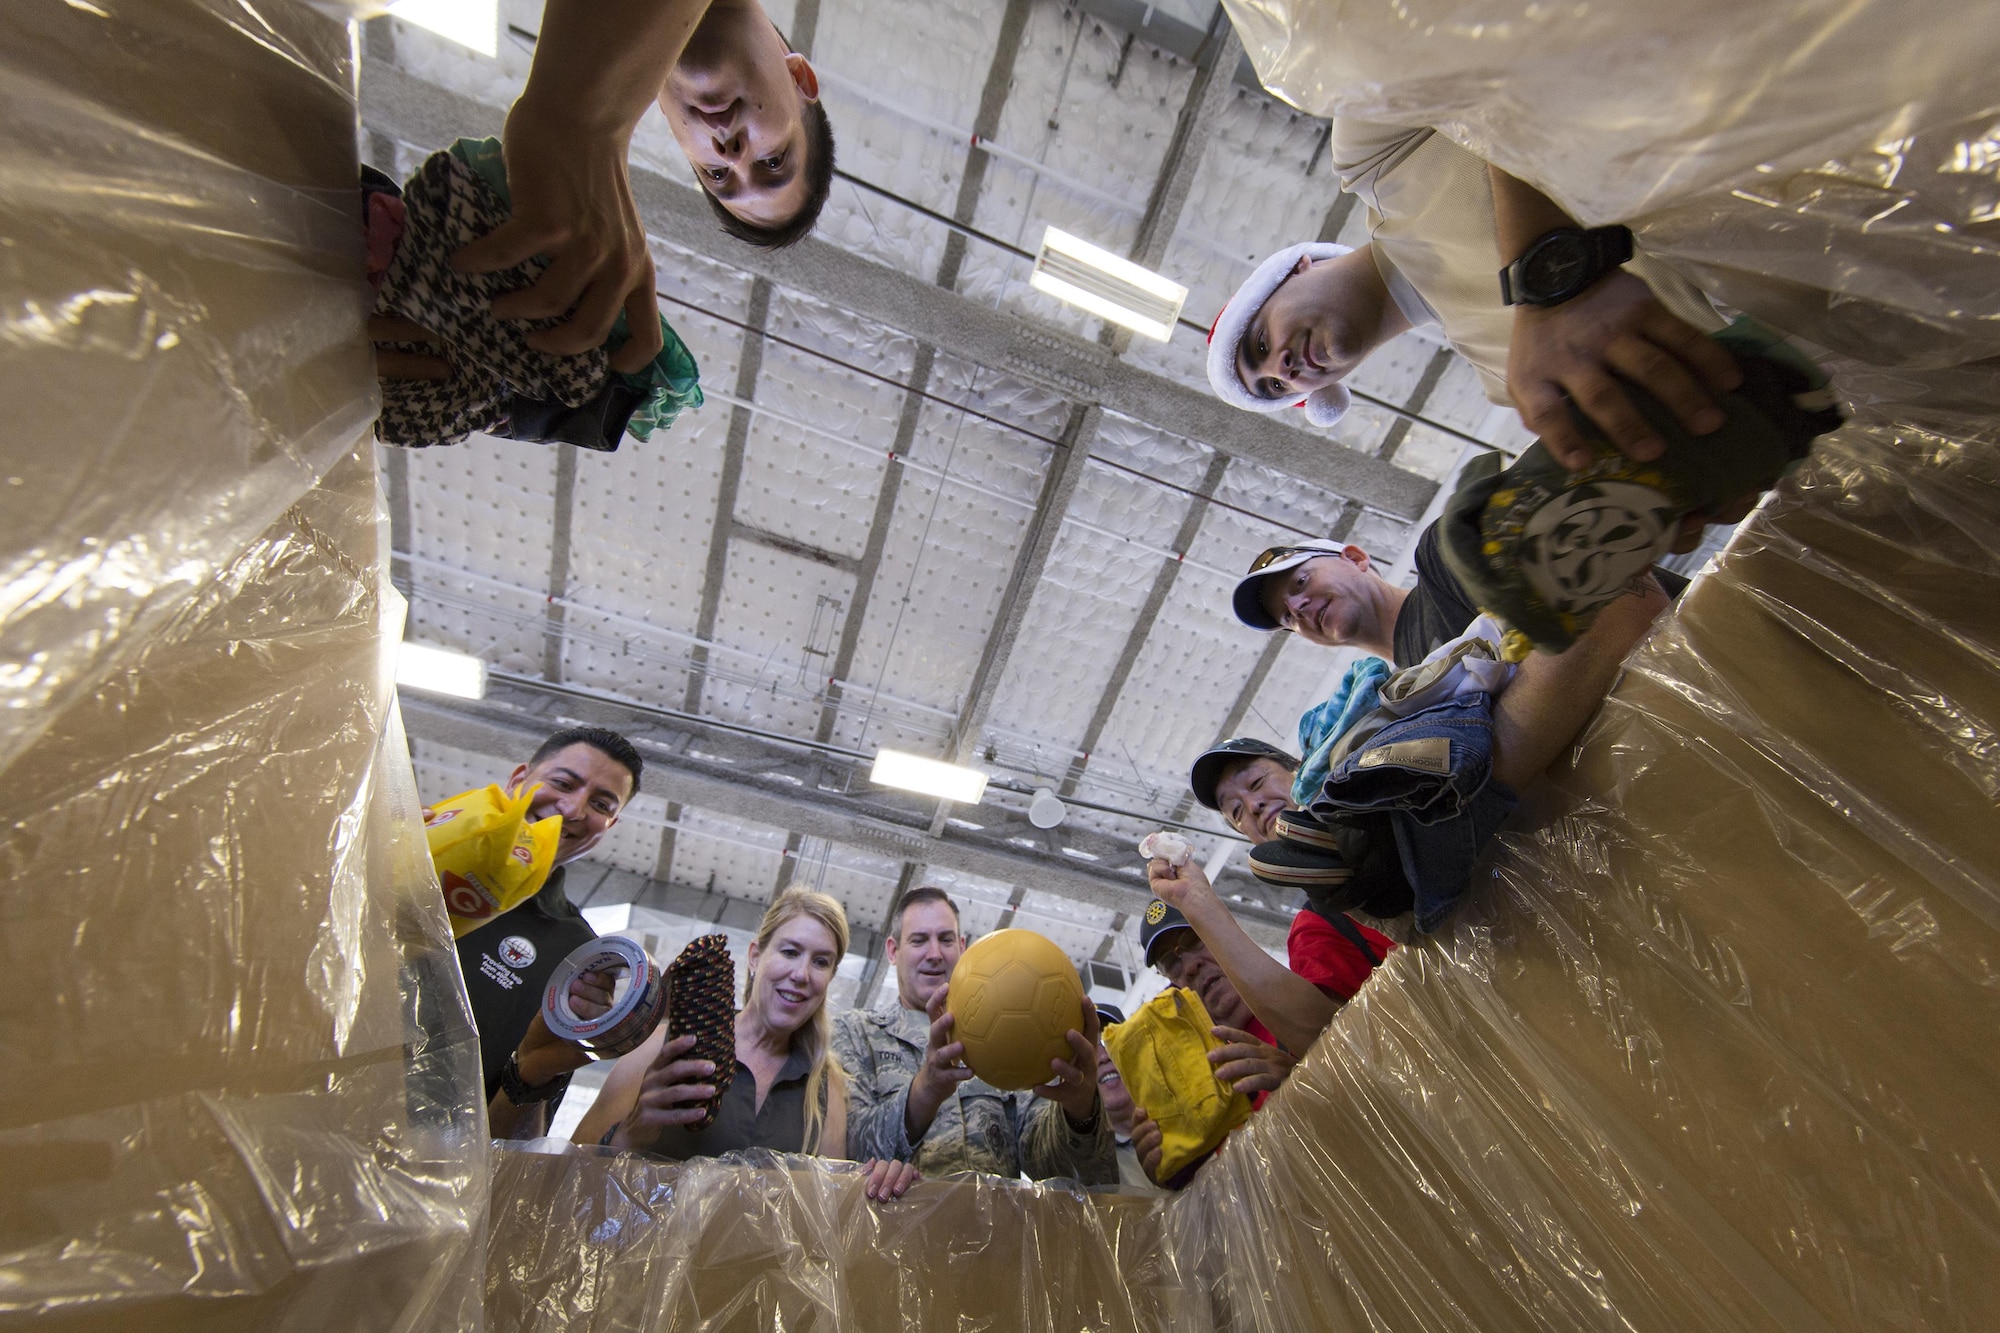 (Center) Brig. Gen. Andrew Toth, 36th Wing Group commander, and volunteers throughout the local community place relief items into a box while sorting donations for Operation Christmas Drop at Andersen Air Force Base, Guam, Dec. 5, 2015. More than 40,000 pounds of goods will be dropped to 56 islands throughout the Commonwealth of the Northern Marianas, Federated States of Micronesia and Republic of Palau during Operation Christmas Drop 2015, the longest running Department of Defense humanitarian airdrop mission. (U.S. Air Force photo by Osakabe Yasuo/Released)